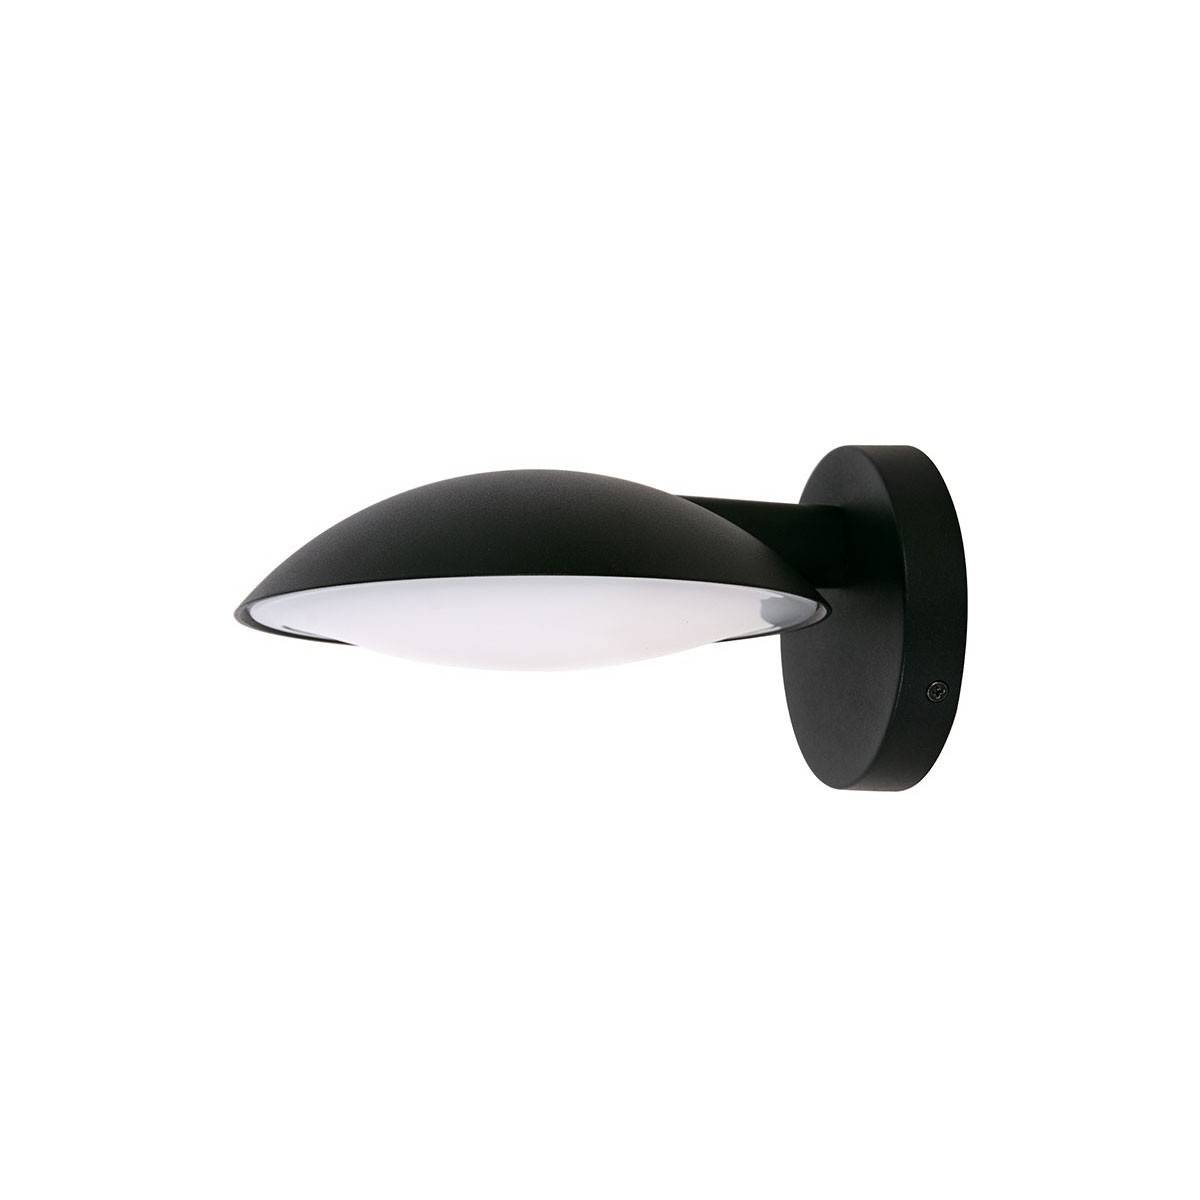 Exterior wall sconce